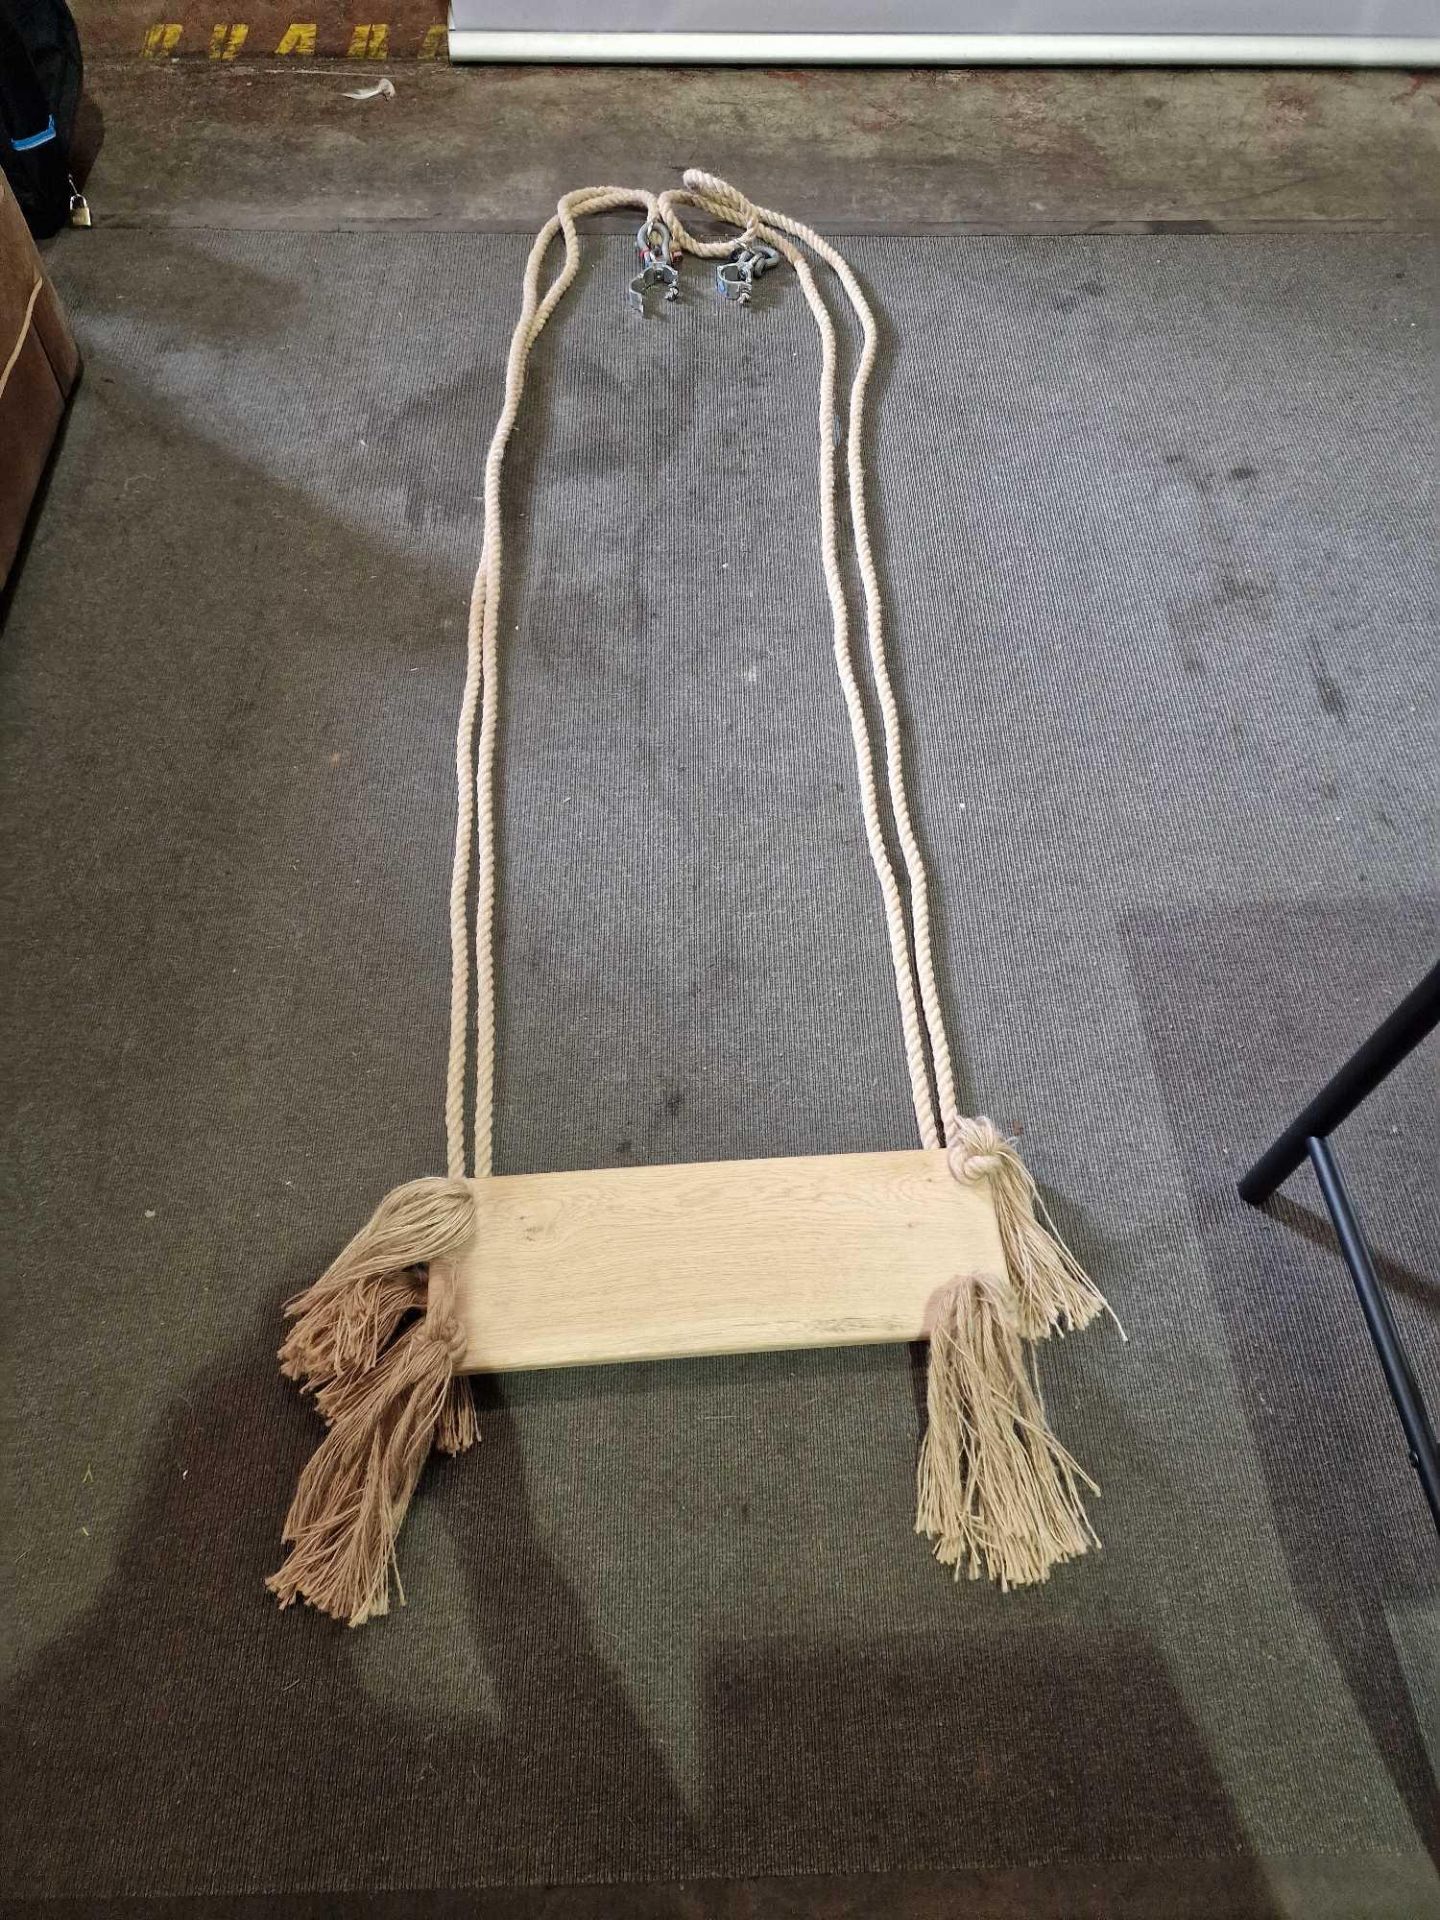 2 x Medium Wooden Rope Swing 60 x 20 x 3cm Thick Natural Rope Product Complete With Clamps And - Image 3 of 3